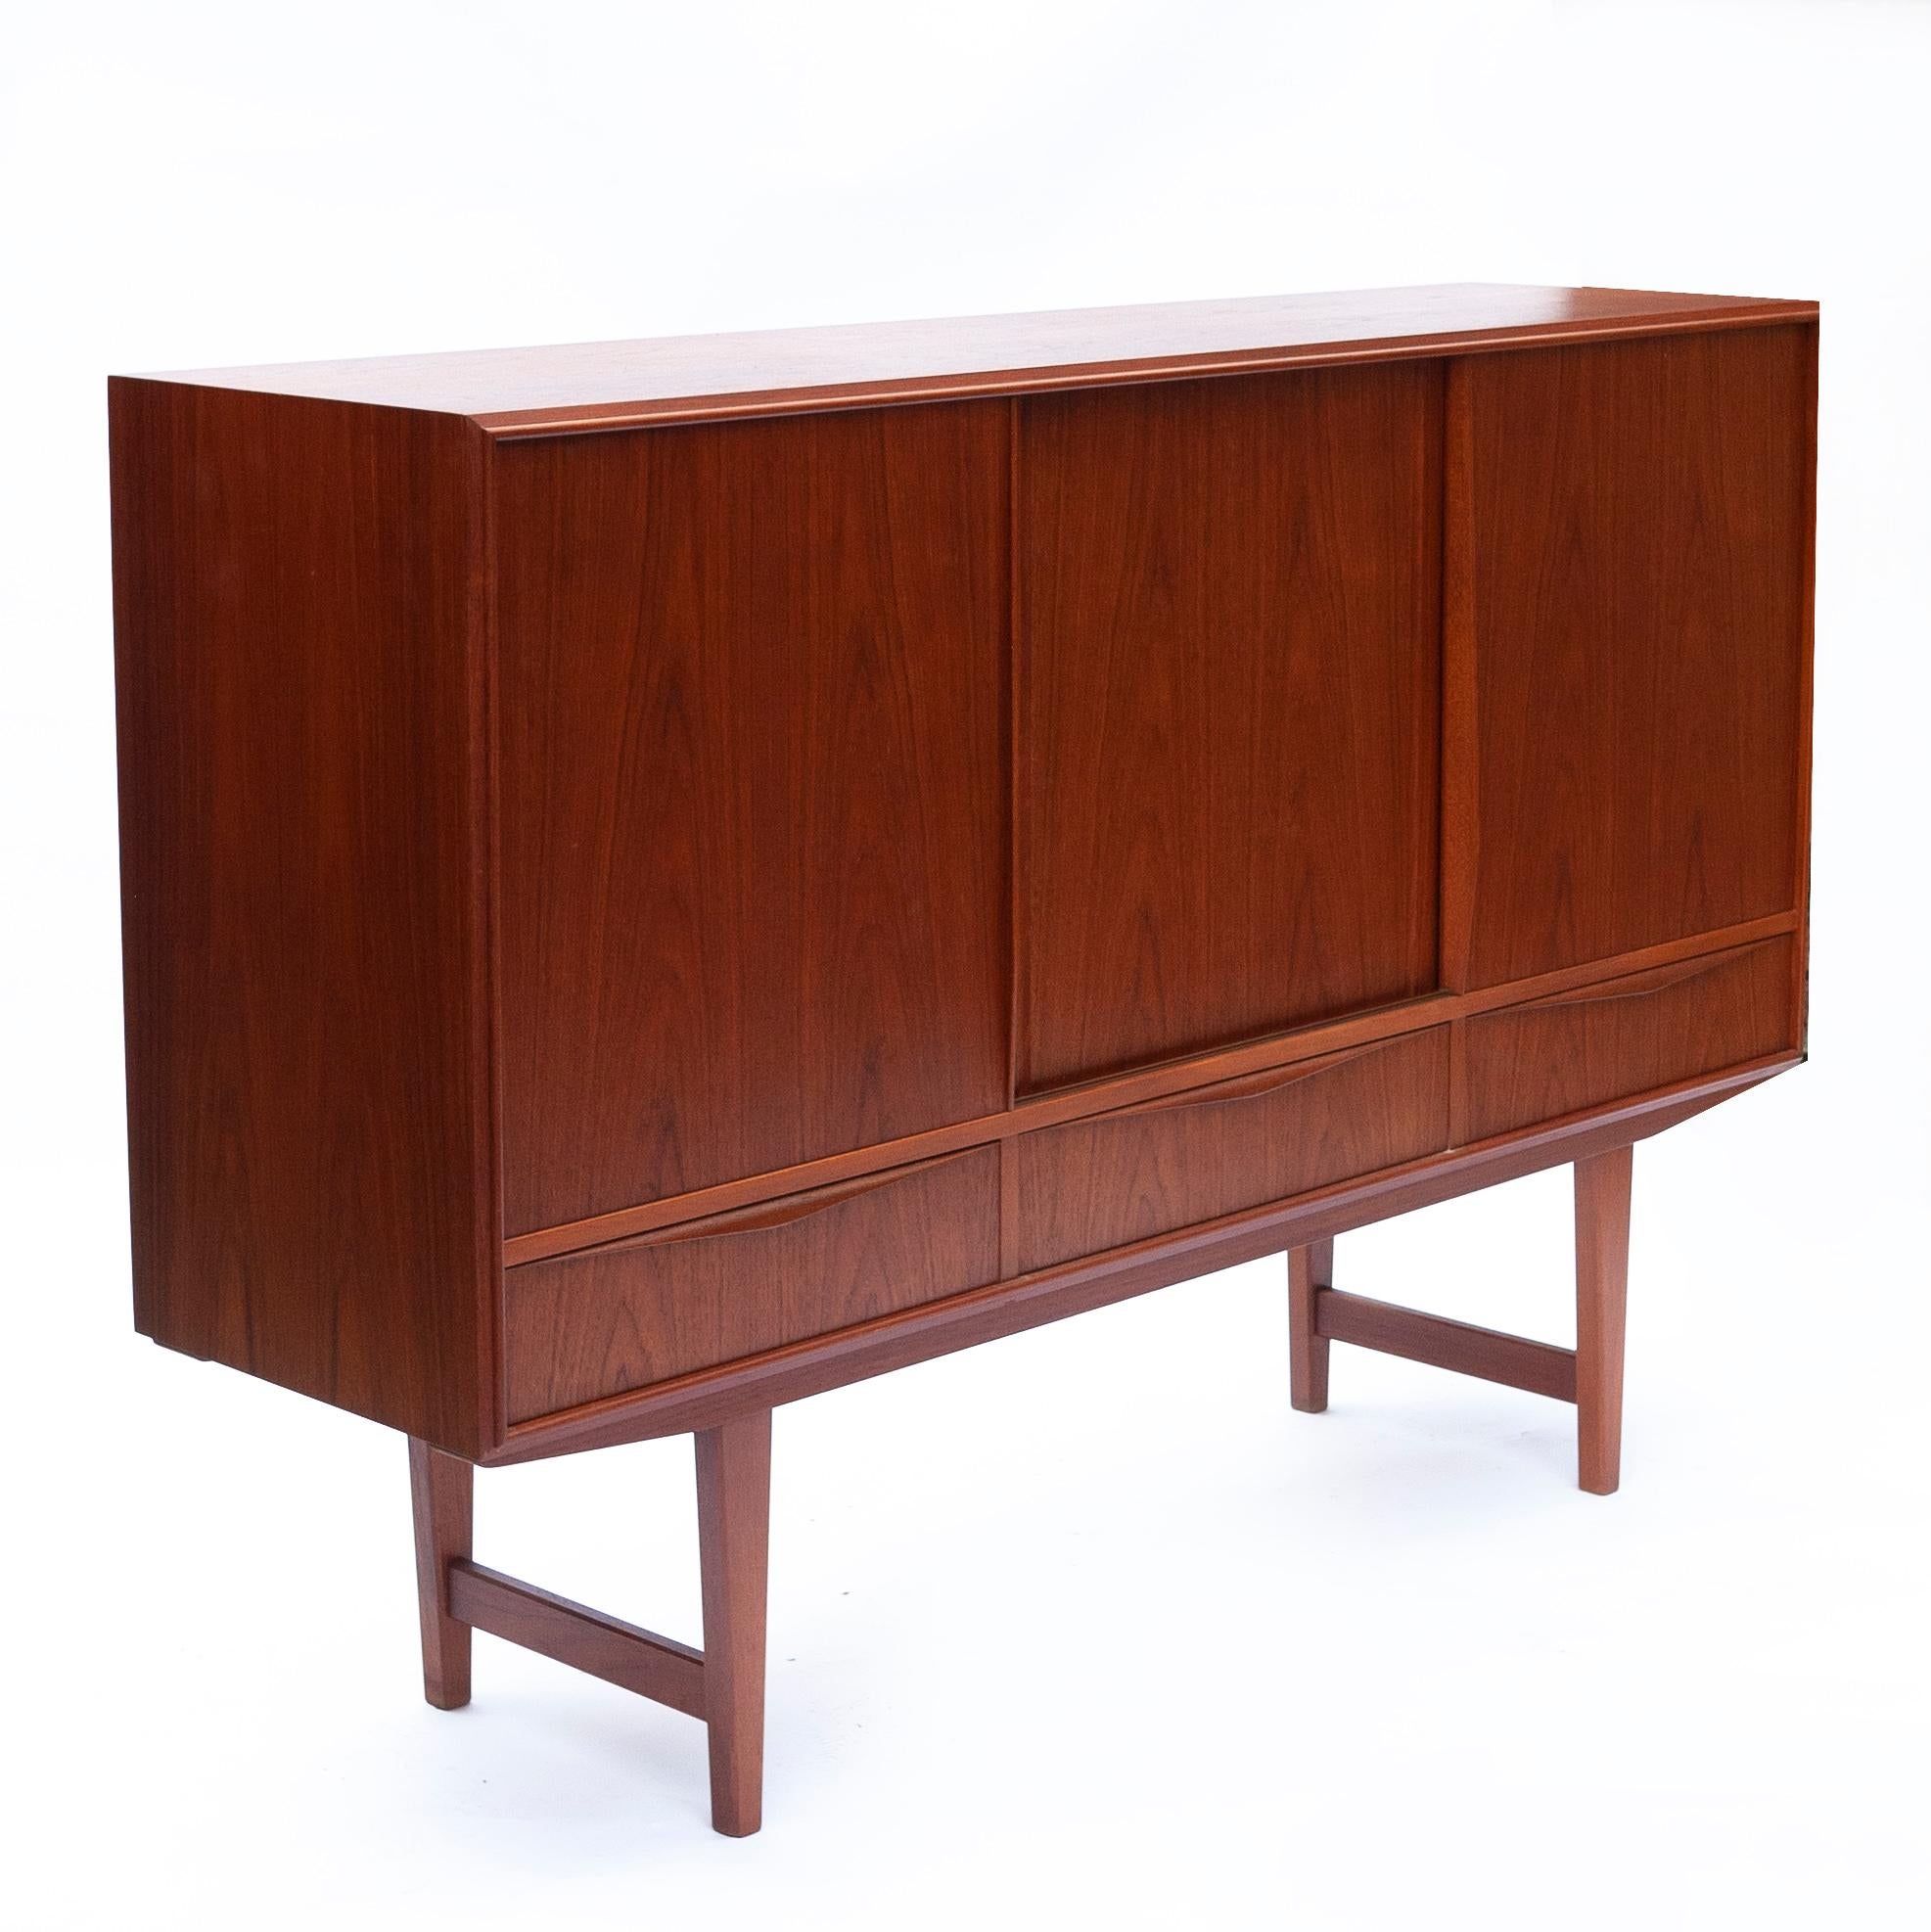 A vintage teak tambour door sideboard with inner decorative drawers, lower drawers and shelves.

Designer - E W Bach

Manufacturer - Sejling Skabe

Design Period - 1960 to 1969

Country of Manufacture - Denmark

Style -